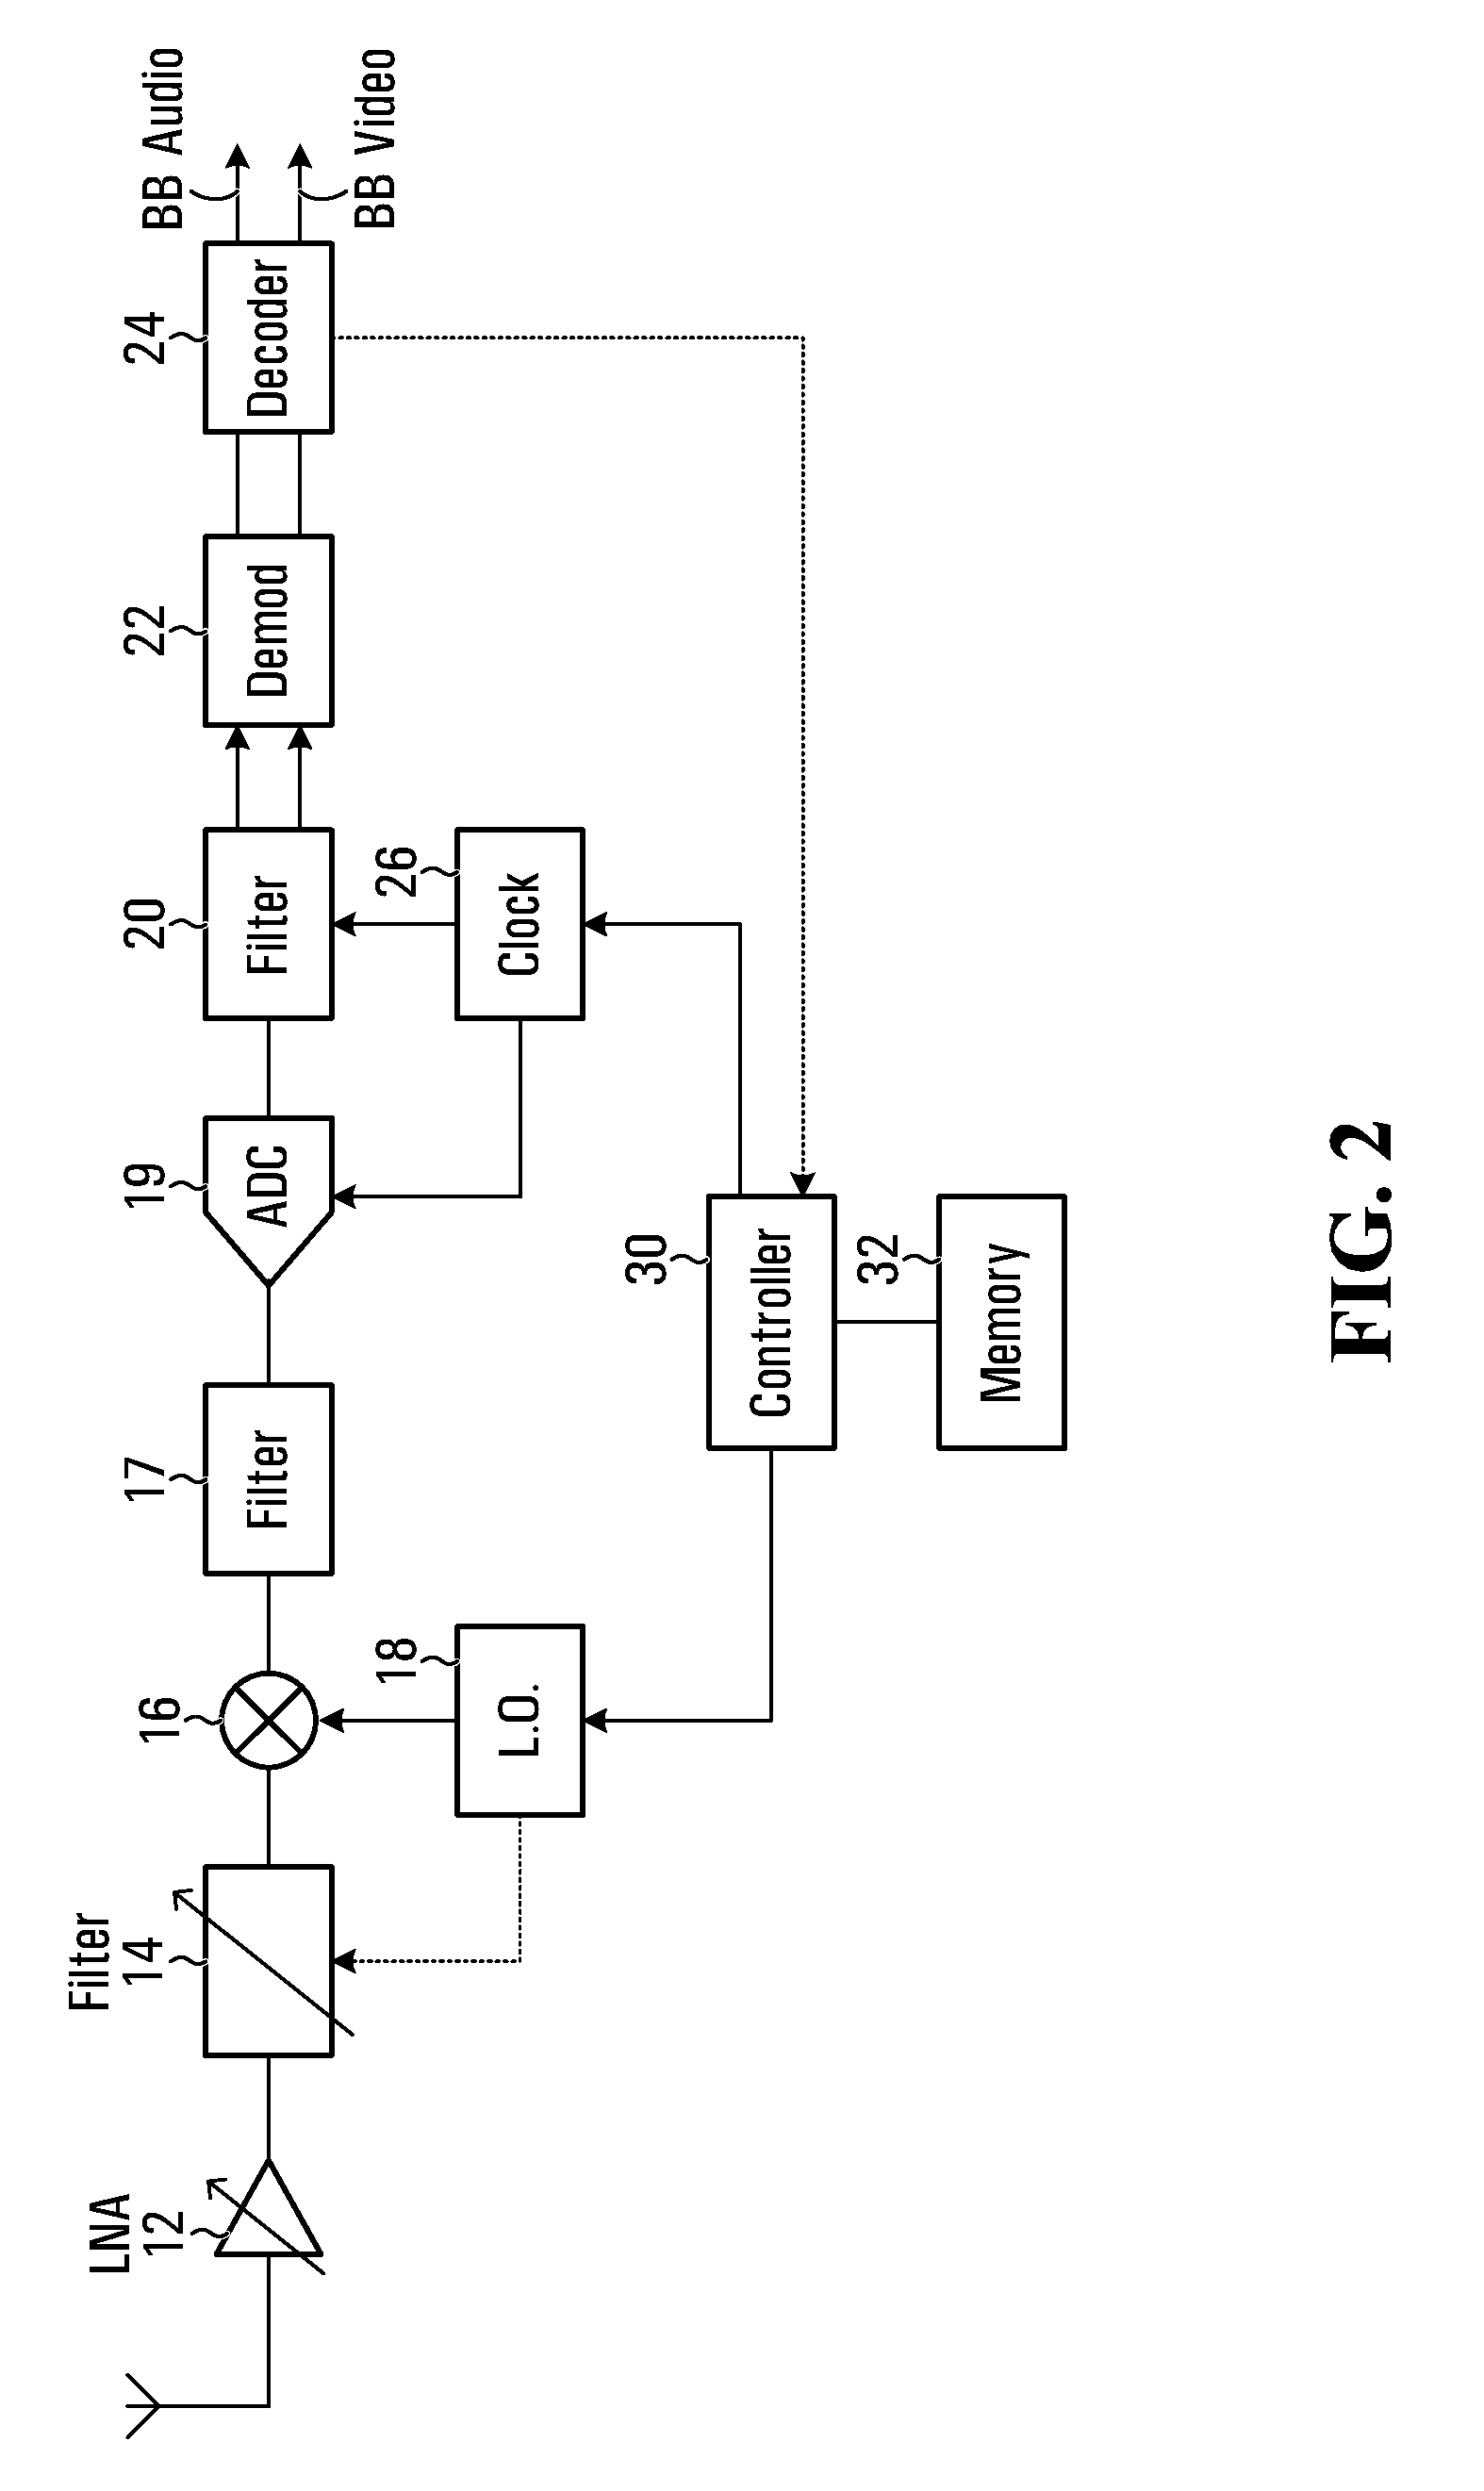 Signal tuning with variable intermediate frequency for image rejection and methods